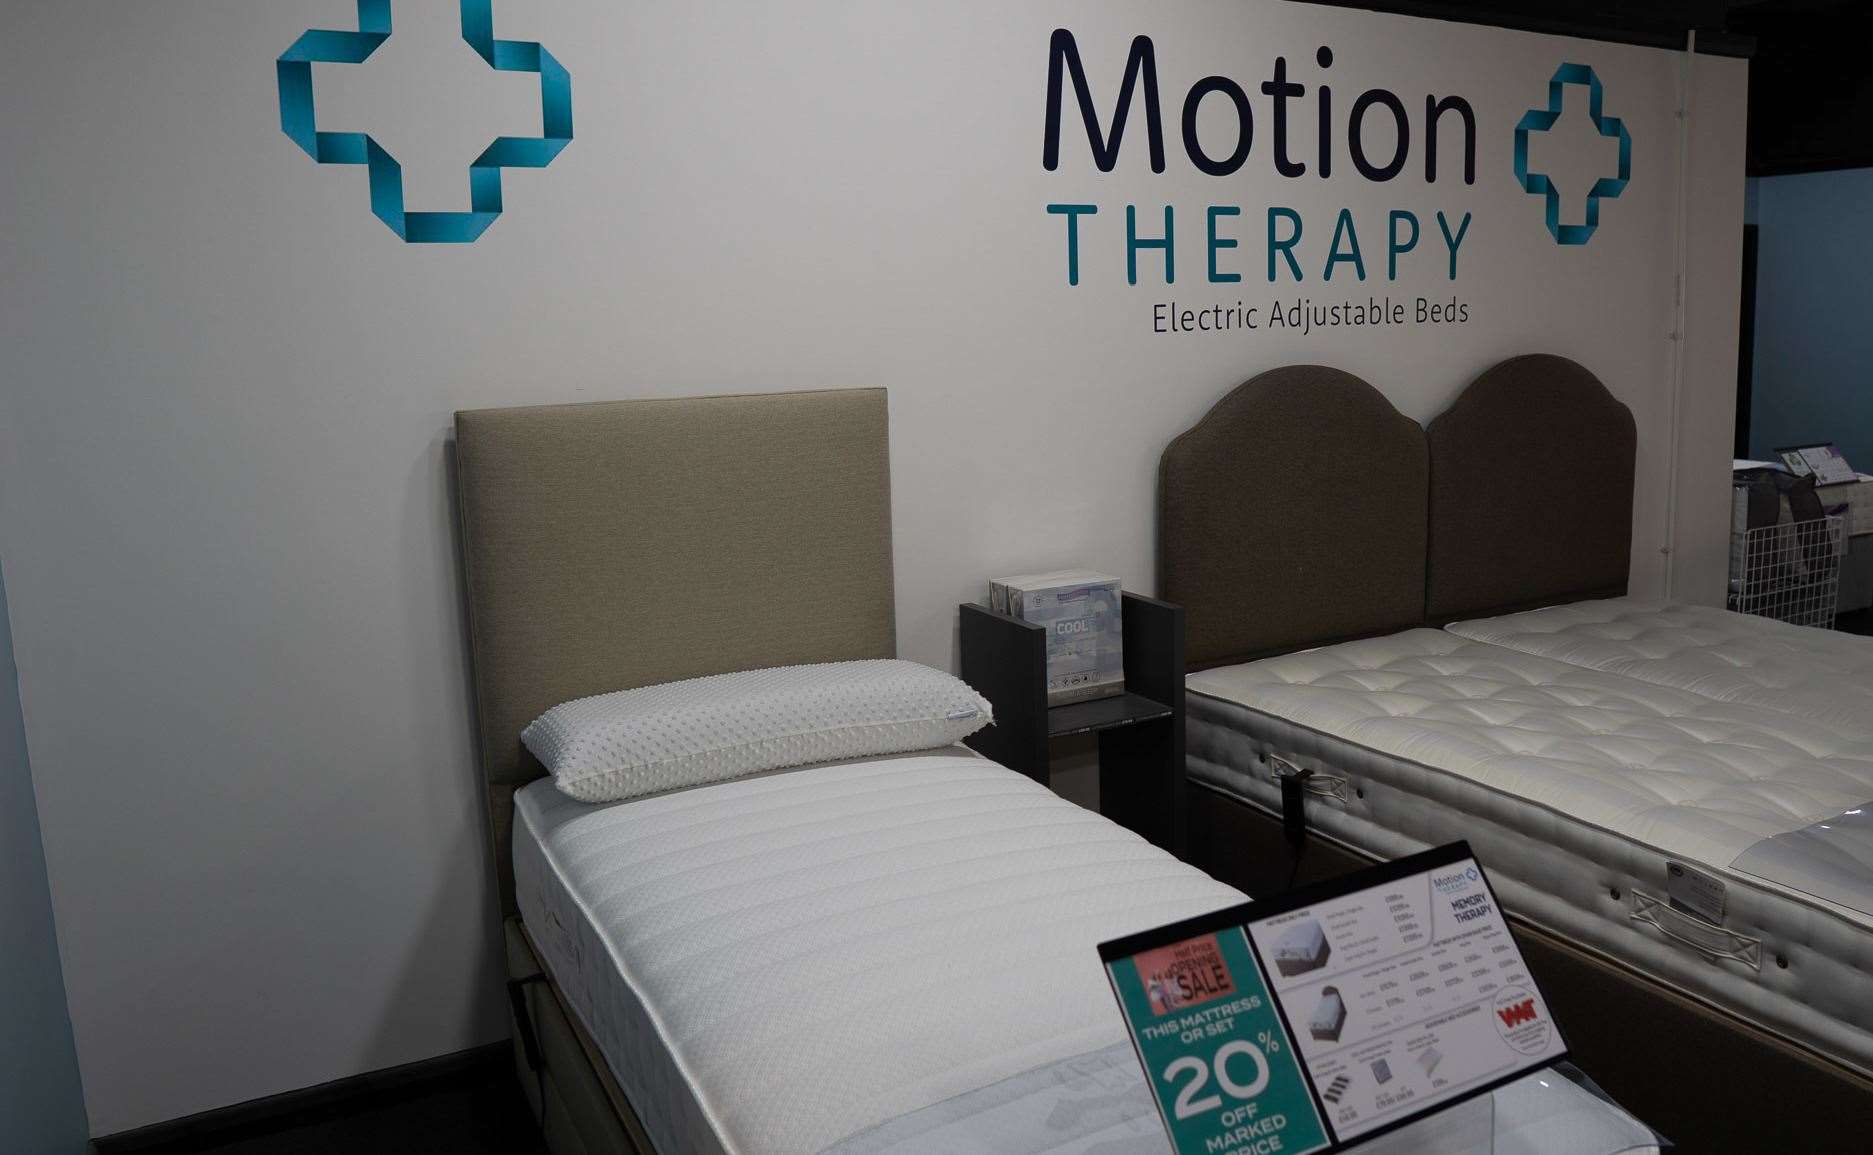 The company's ethos is to provide a ‘great night’s sleep’